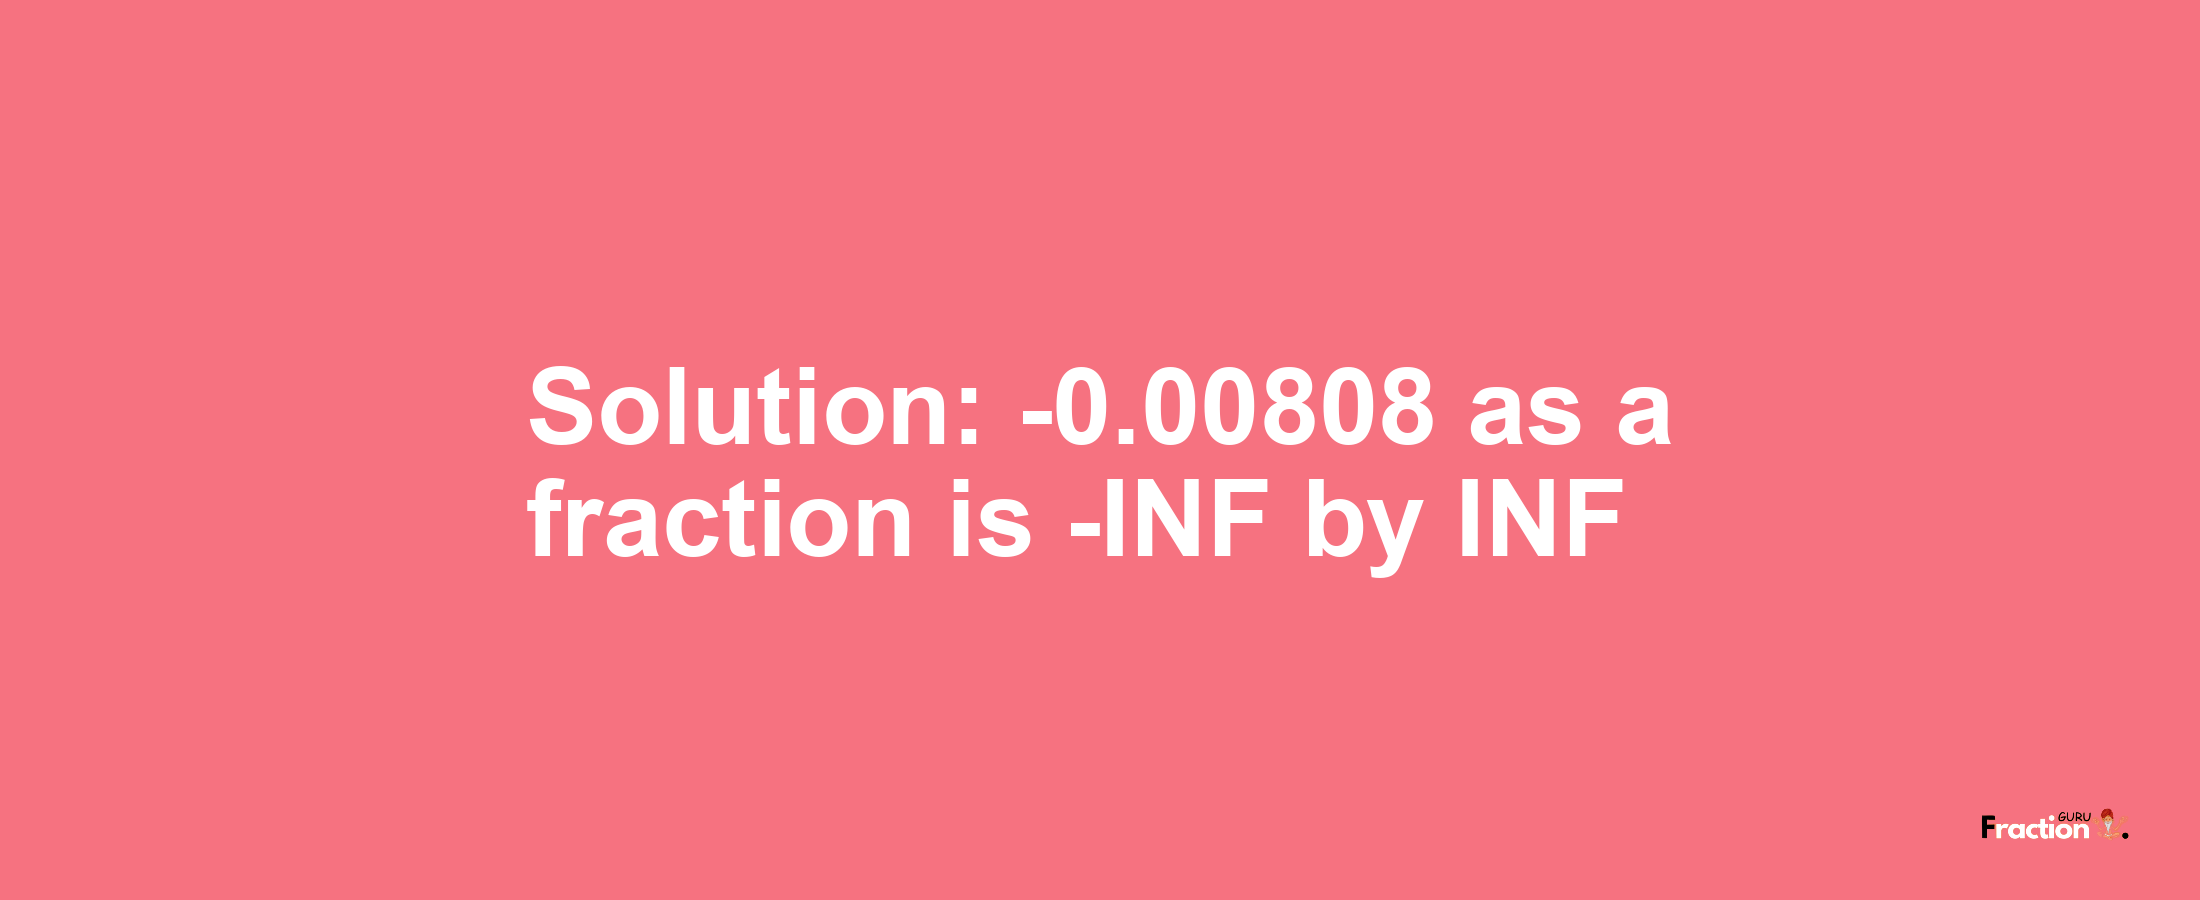 Solution:-0.00808 as a fraction is -INF/INF